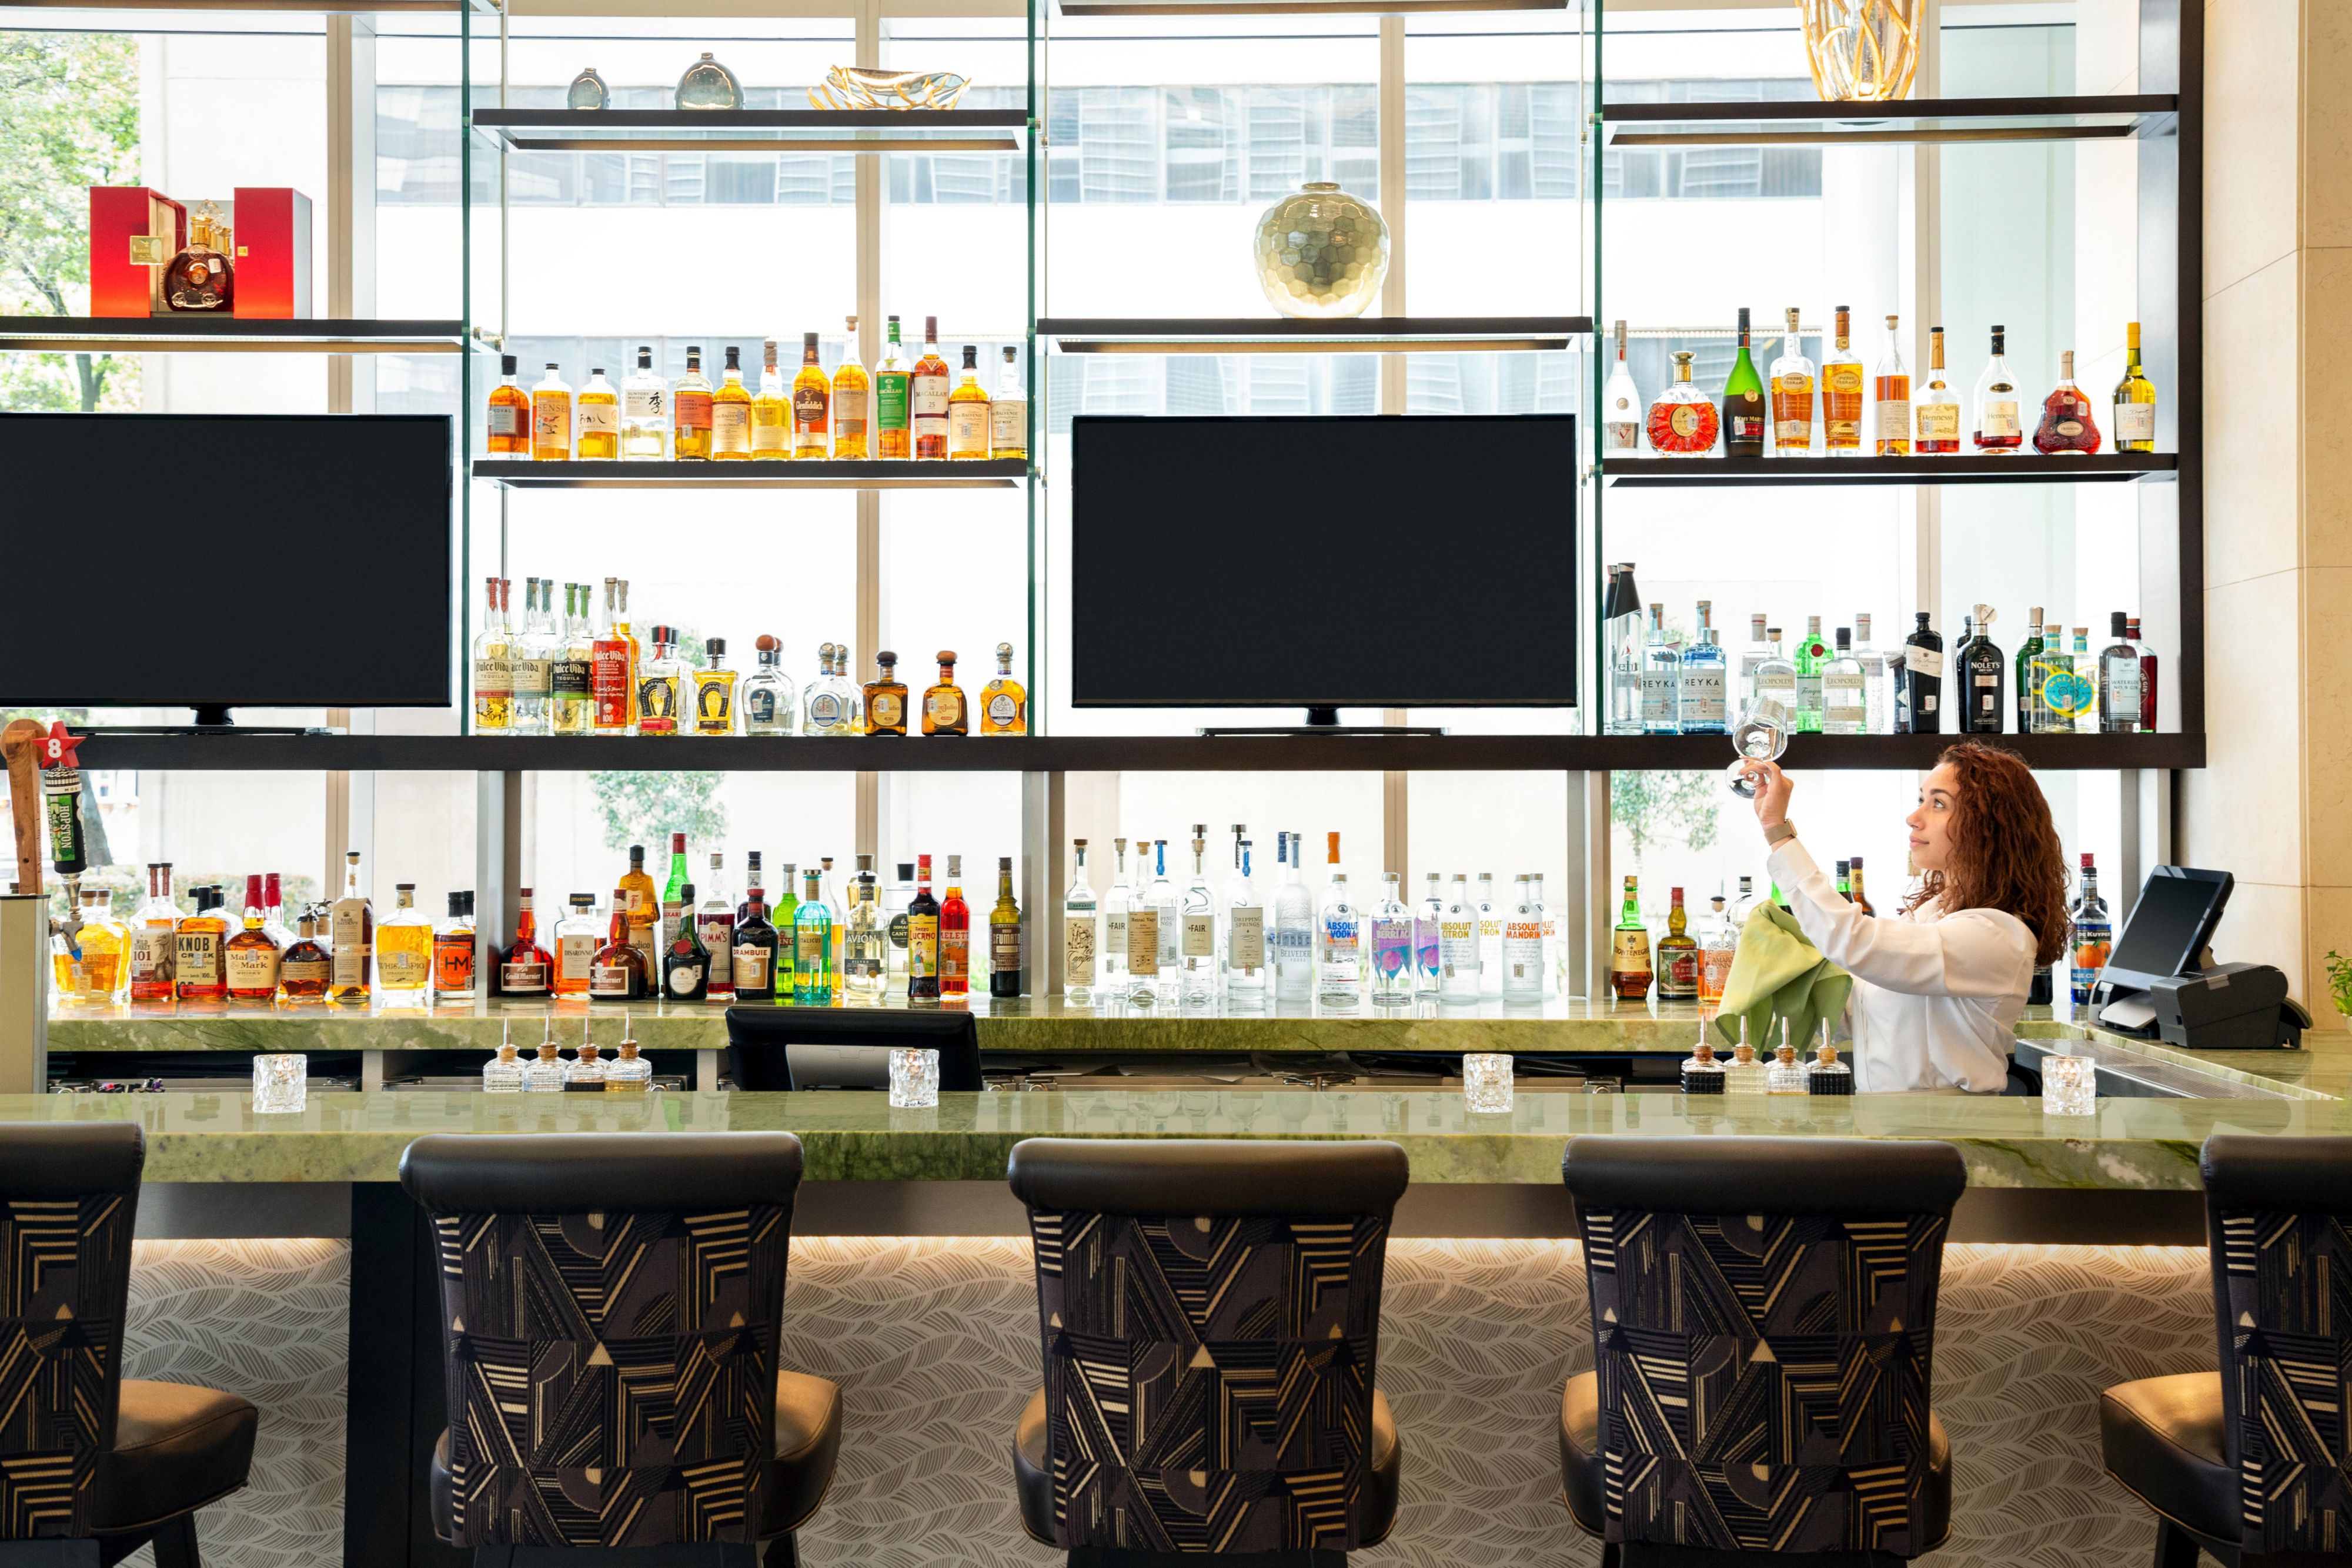 Unwind with a handcrafted cocktail at The Naturalist lobby lounge.